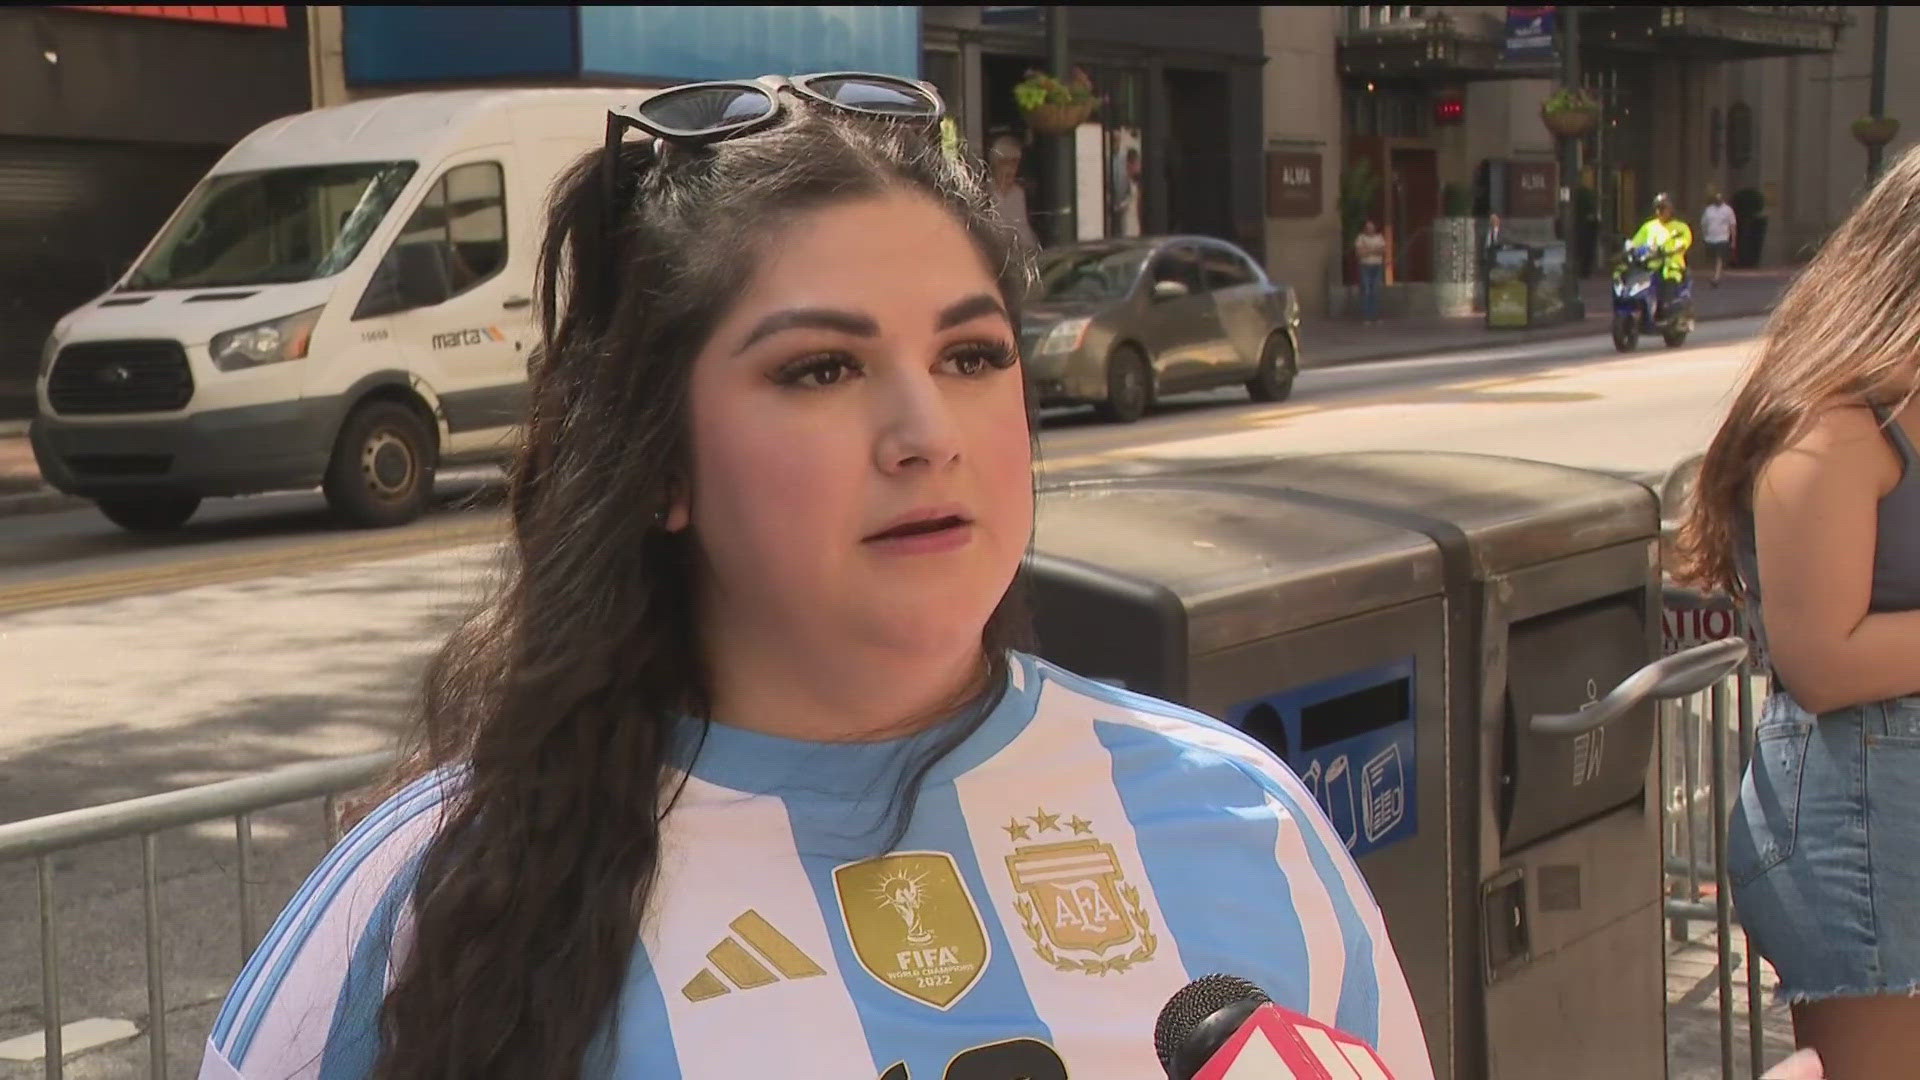 Soccer fever has taken over Atlanta as fans have come from across the Americas to cheer on their teams as Canada and Argentina, including star Lionel Messi, play.